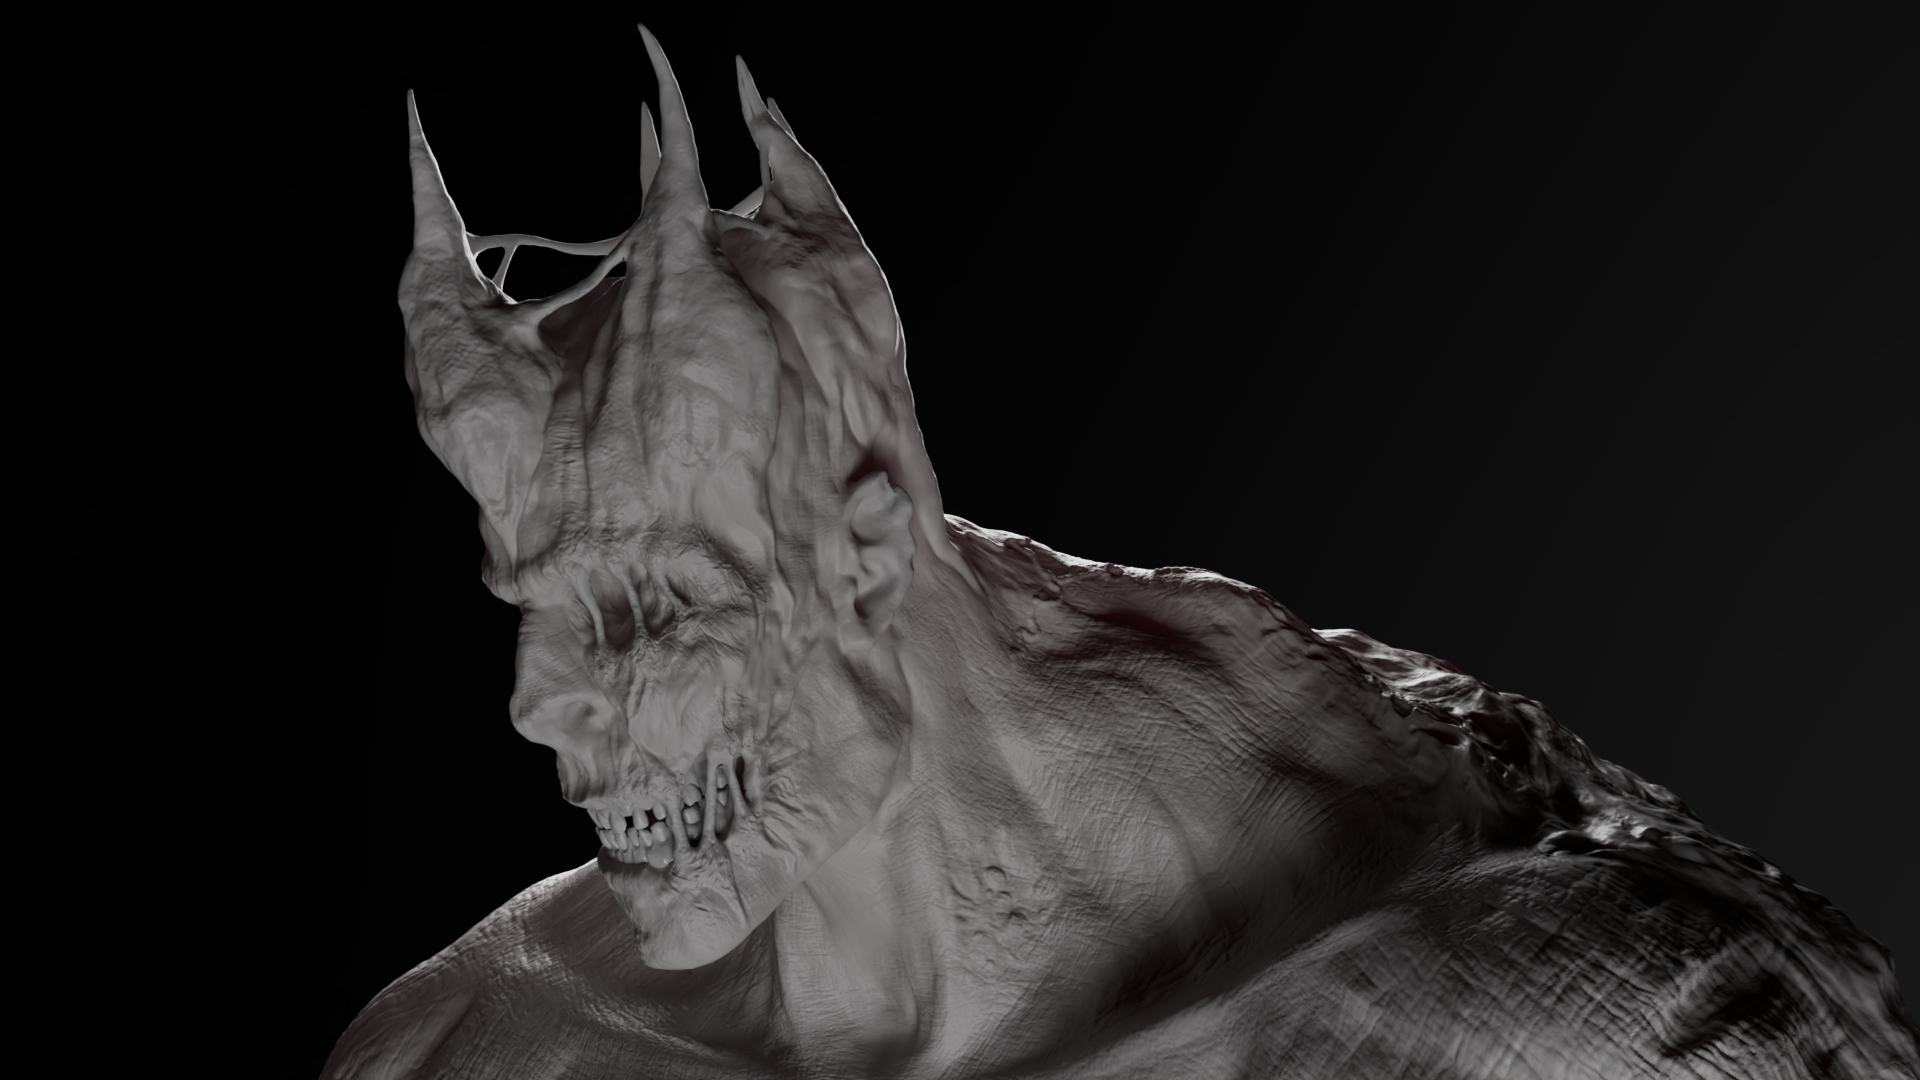 Up close render of the a 3D sculpt, focusing on crown's details and showcasing facial disfigurements made to the character due to the crown's effects.